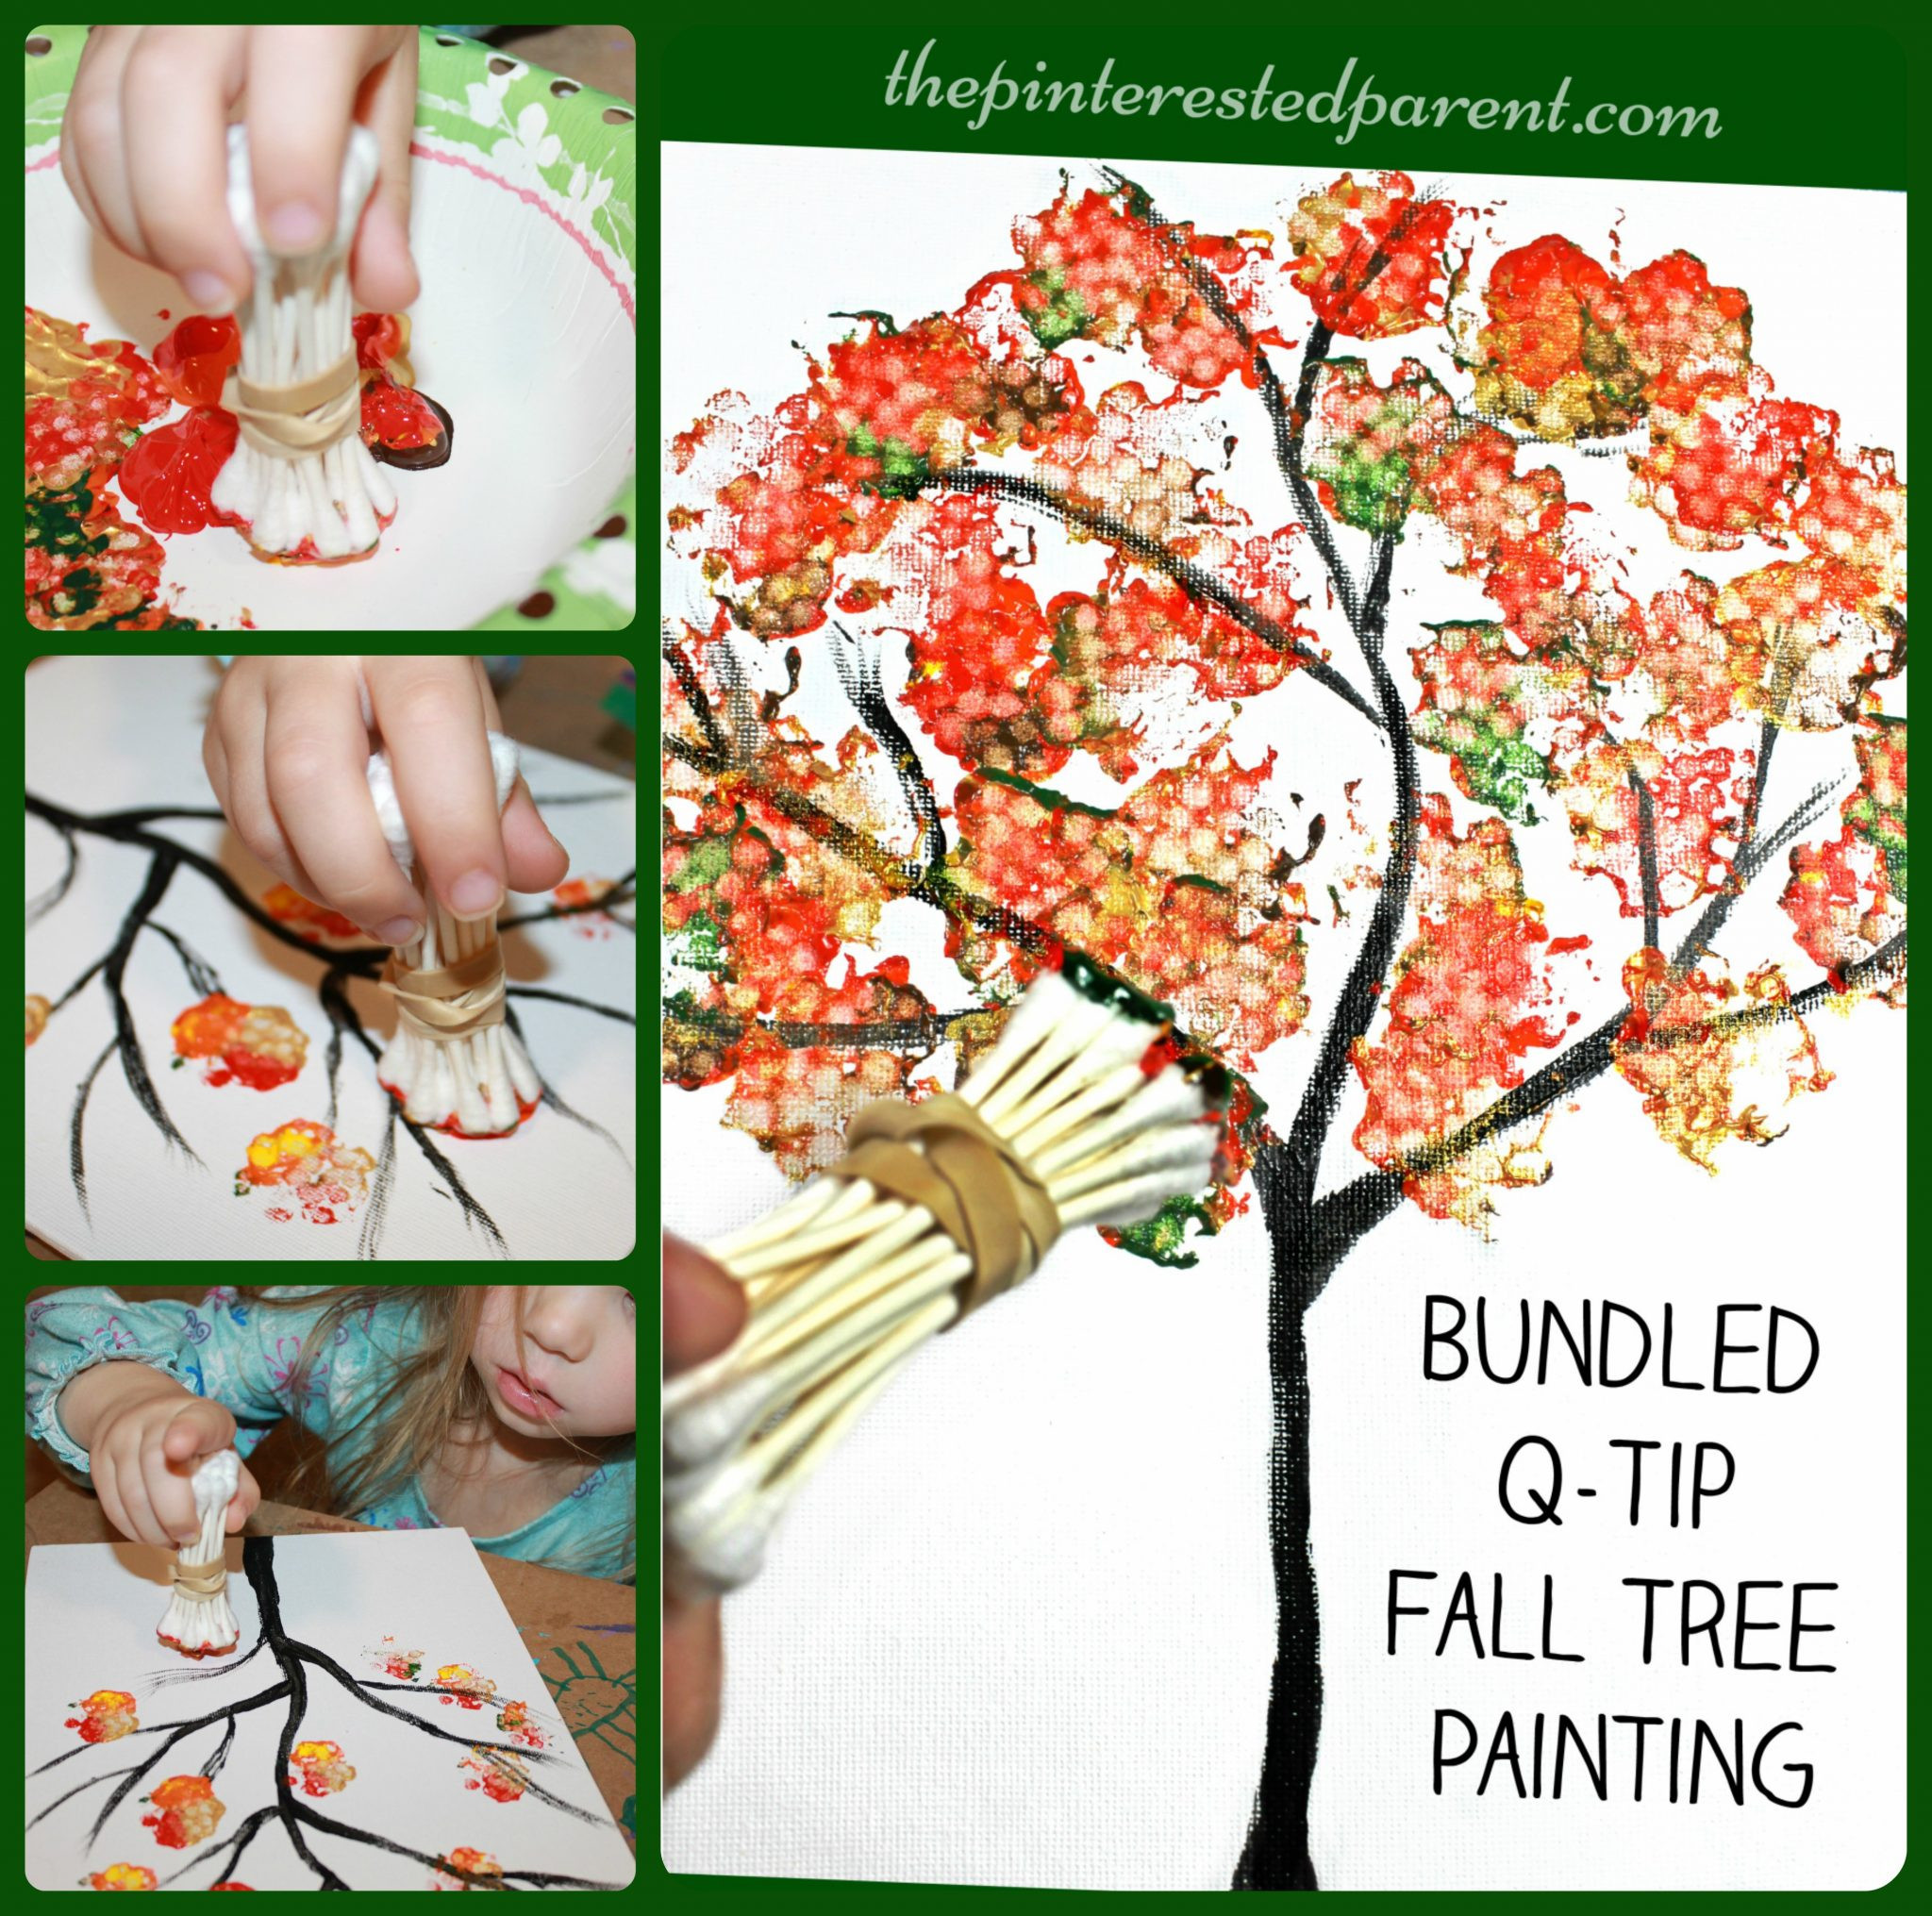 Fall Art And Crafts For Toddlers
 Bundled Q Tip Autumn Tree – The Pinterested Parent